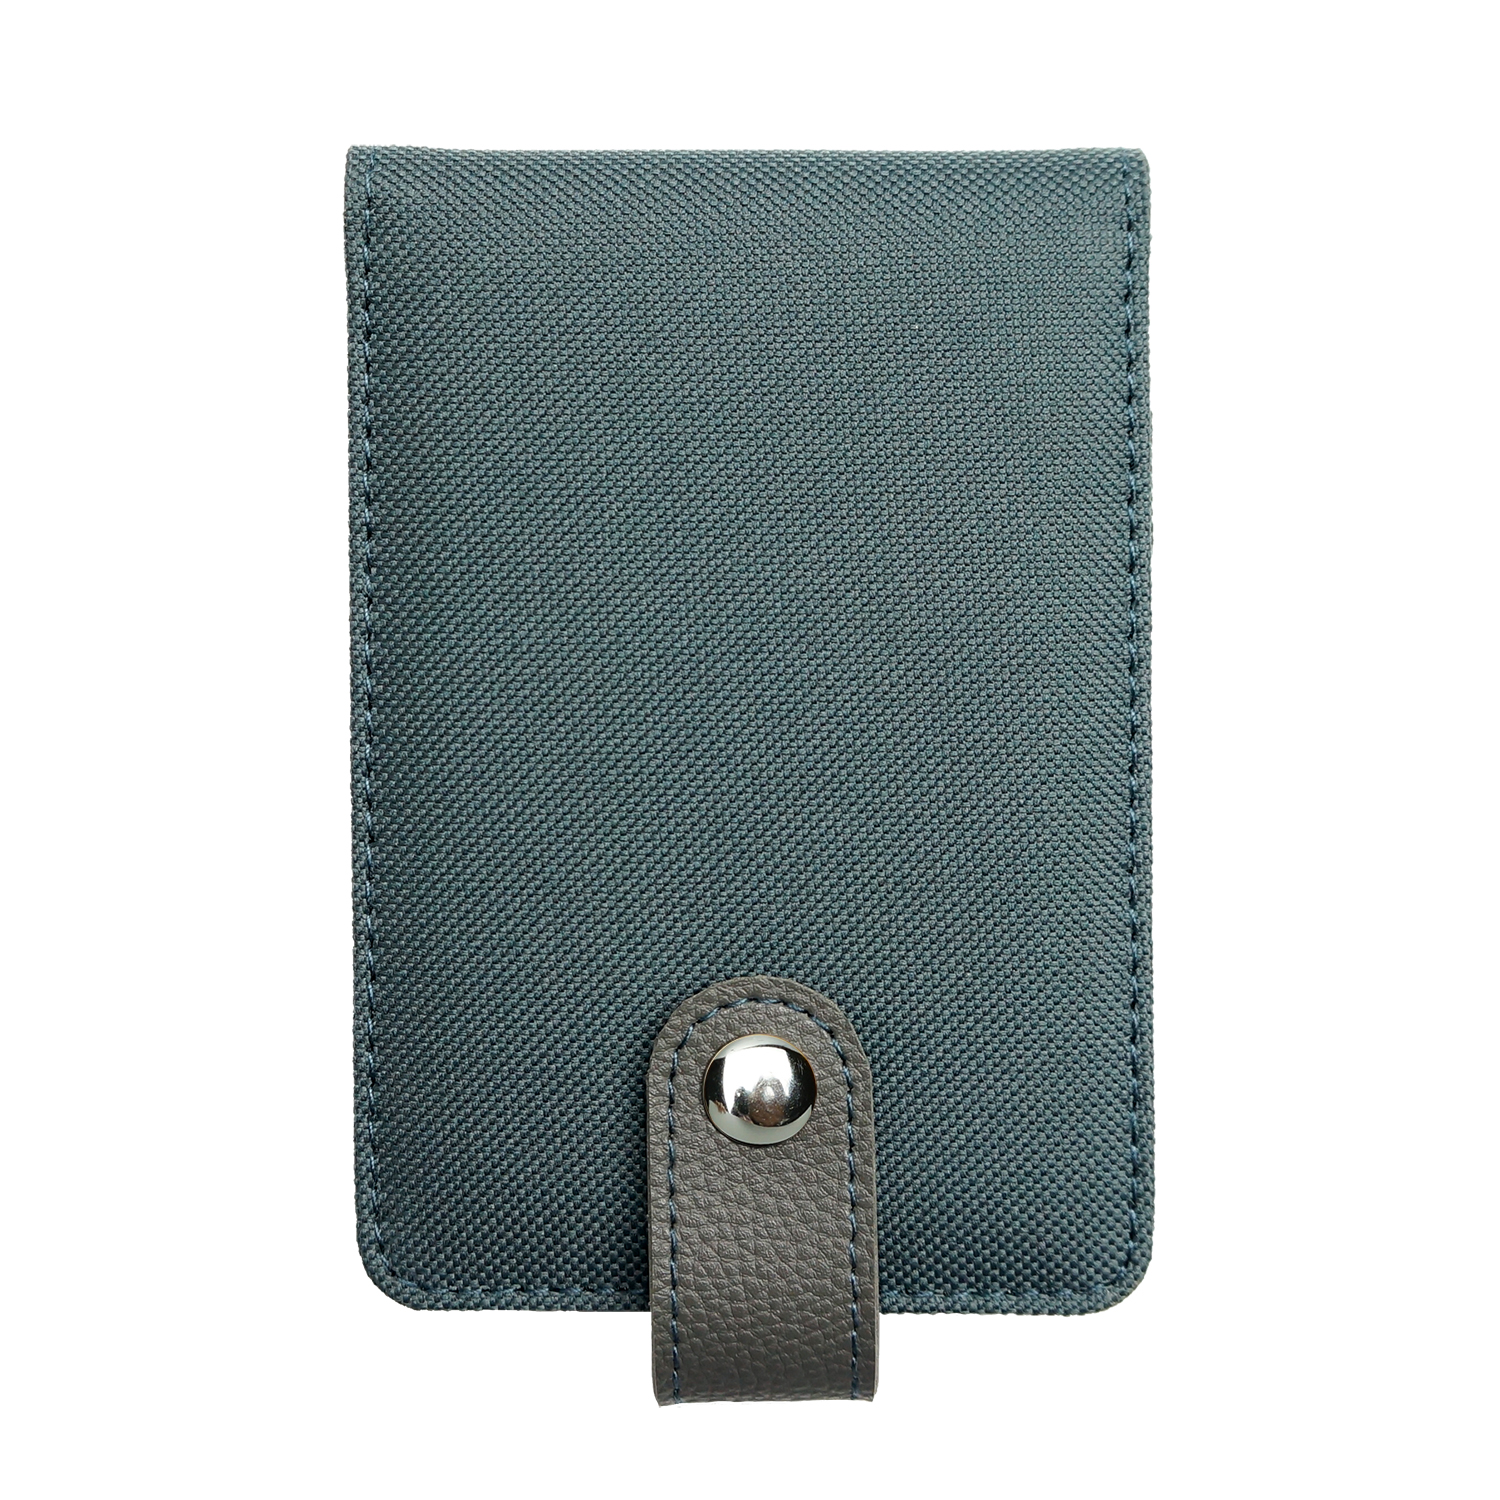 35B-72043 Jotter with card holder Green